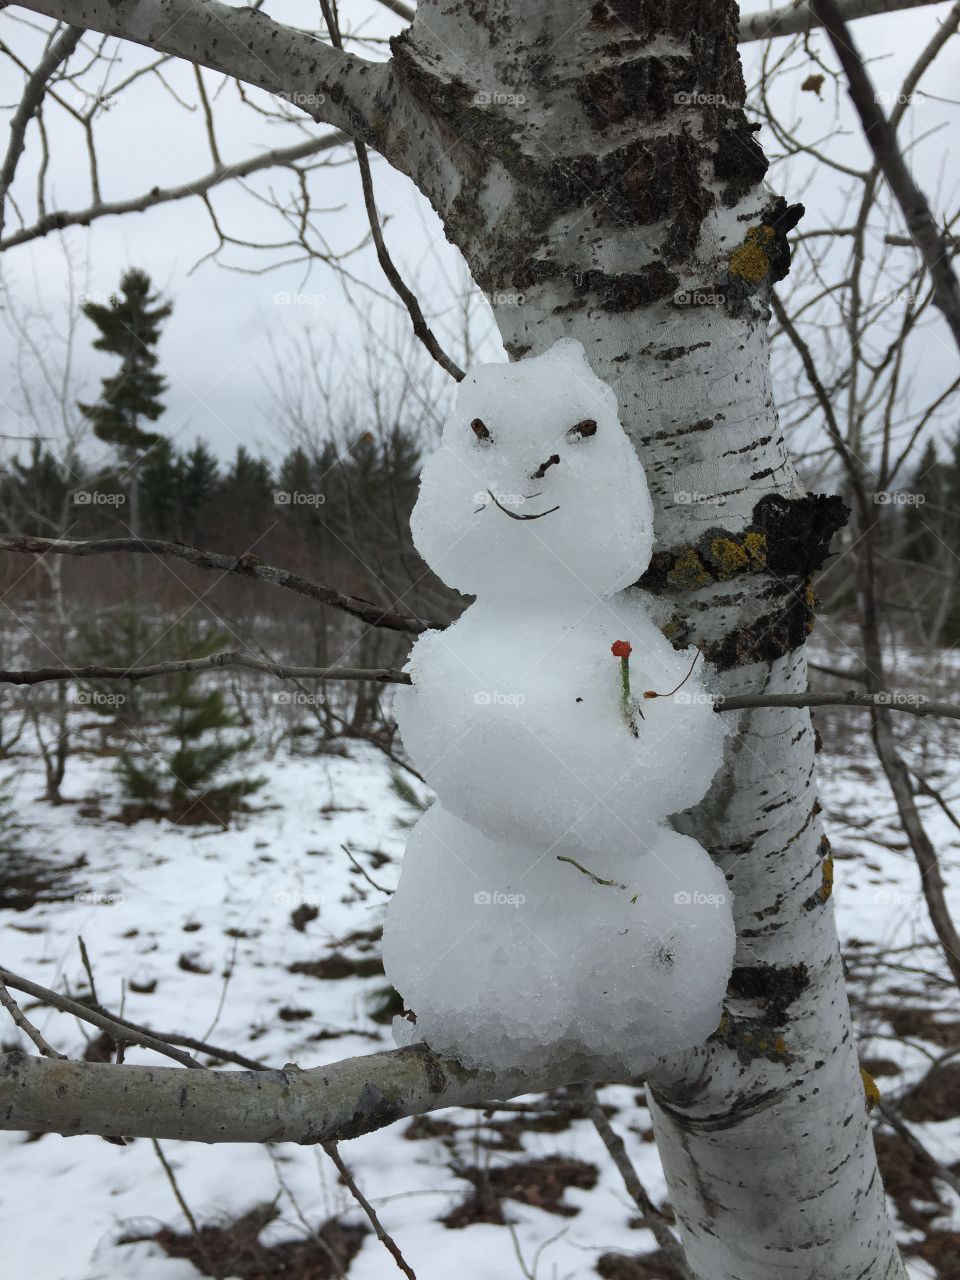 Smiling snowman. Tiny snowman in a tree and a cute smile